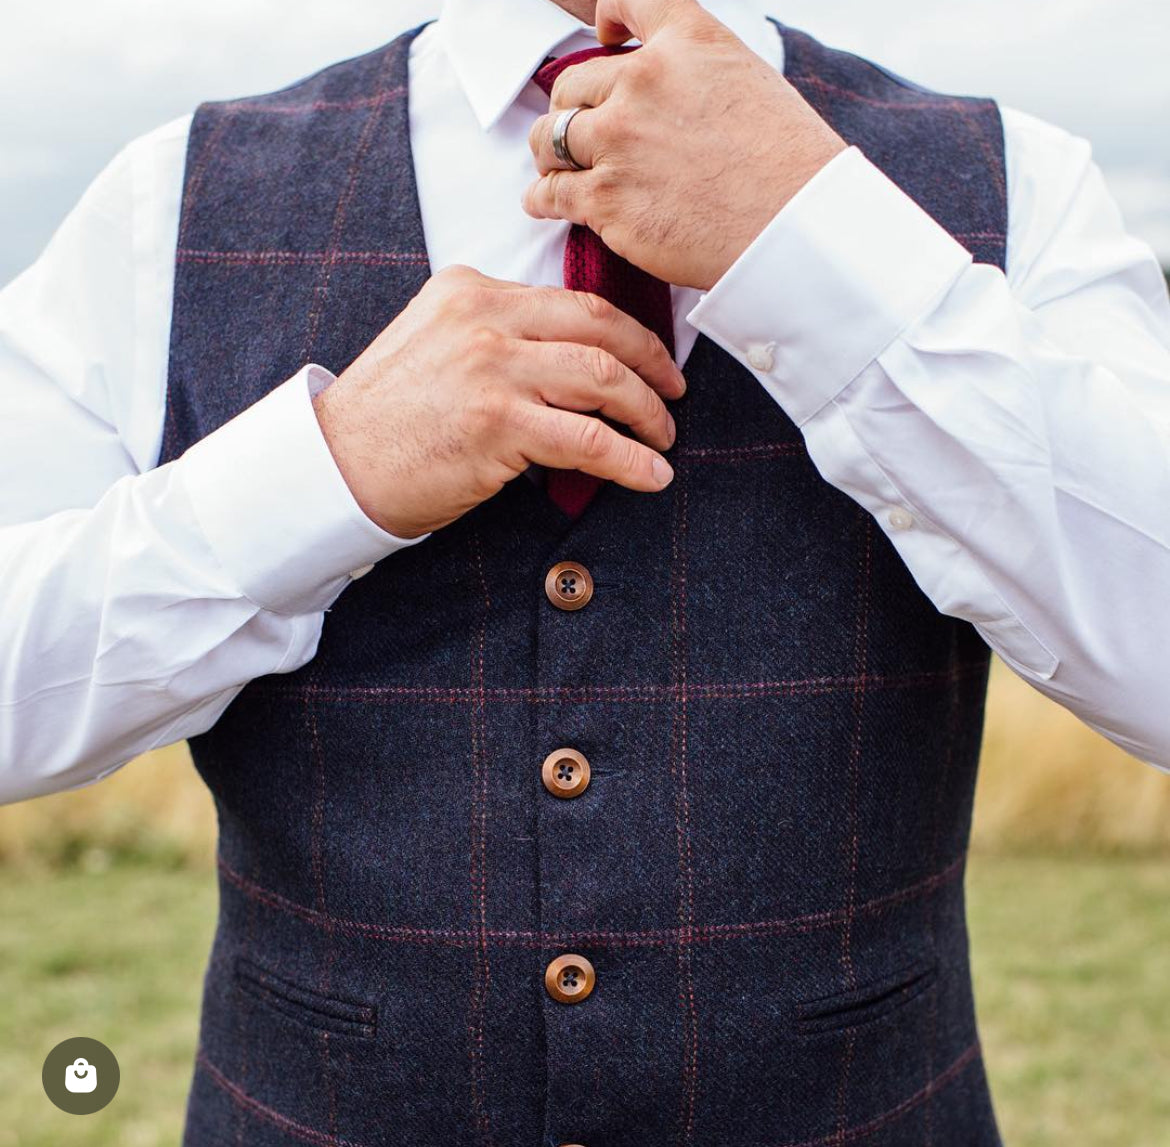 'Tom Branson' Mens waistcoat handmade in a deep navy British tweed with large check